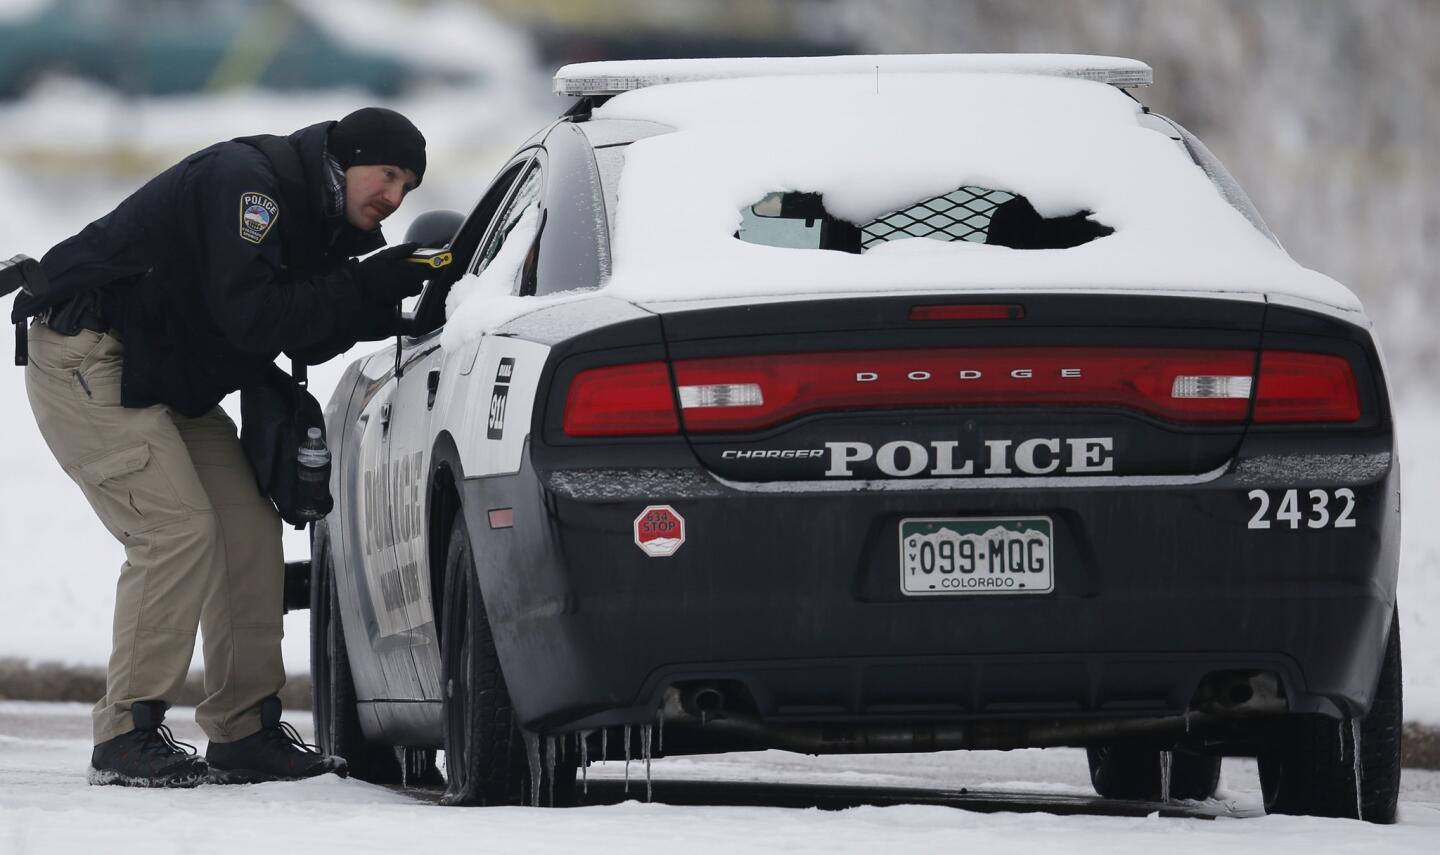 A crime scene investigator looks over a police vehicle damaged during Friday's shooting spree near a Planned Parenthood clinic on Nov. 29, 2015, in northwest Colorado Springs, Colo.